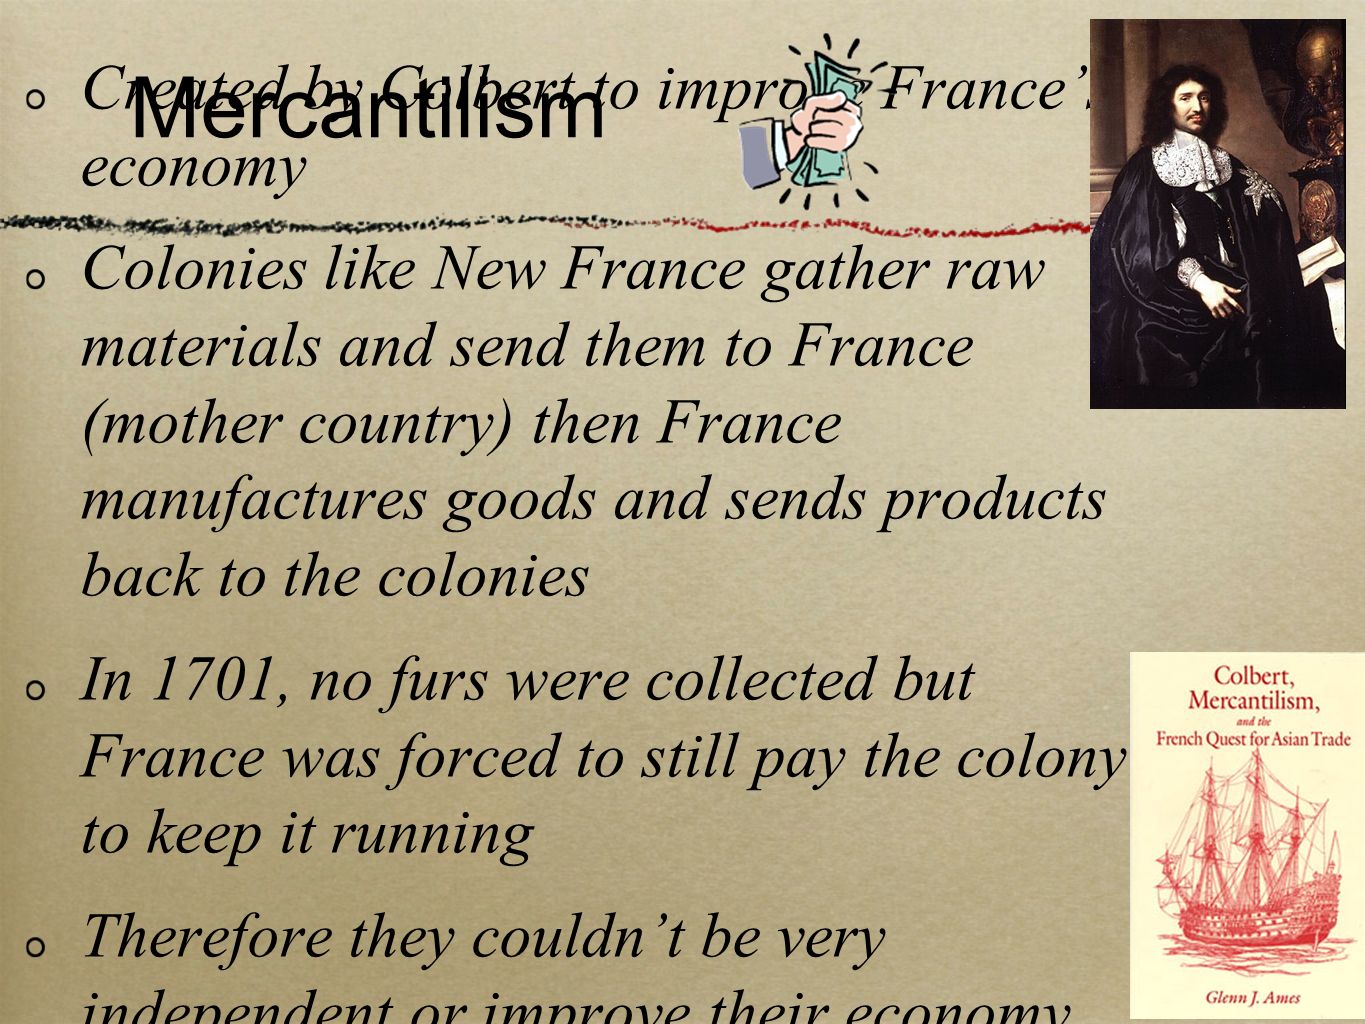 Mercantilism Created by Colbert to improve France’s economy Colonies like New France gather raw materials and send them to France (mother country) then France manufactures goods and sends products back to the colonies In 1701, no furs were collected but France was forced to still pay the colony to keep it running Therefore they couldn’t be very independent or improve their economy, but New France kept stability because of France